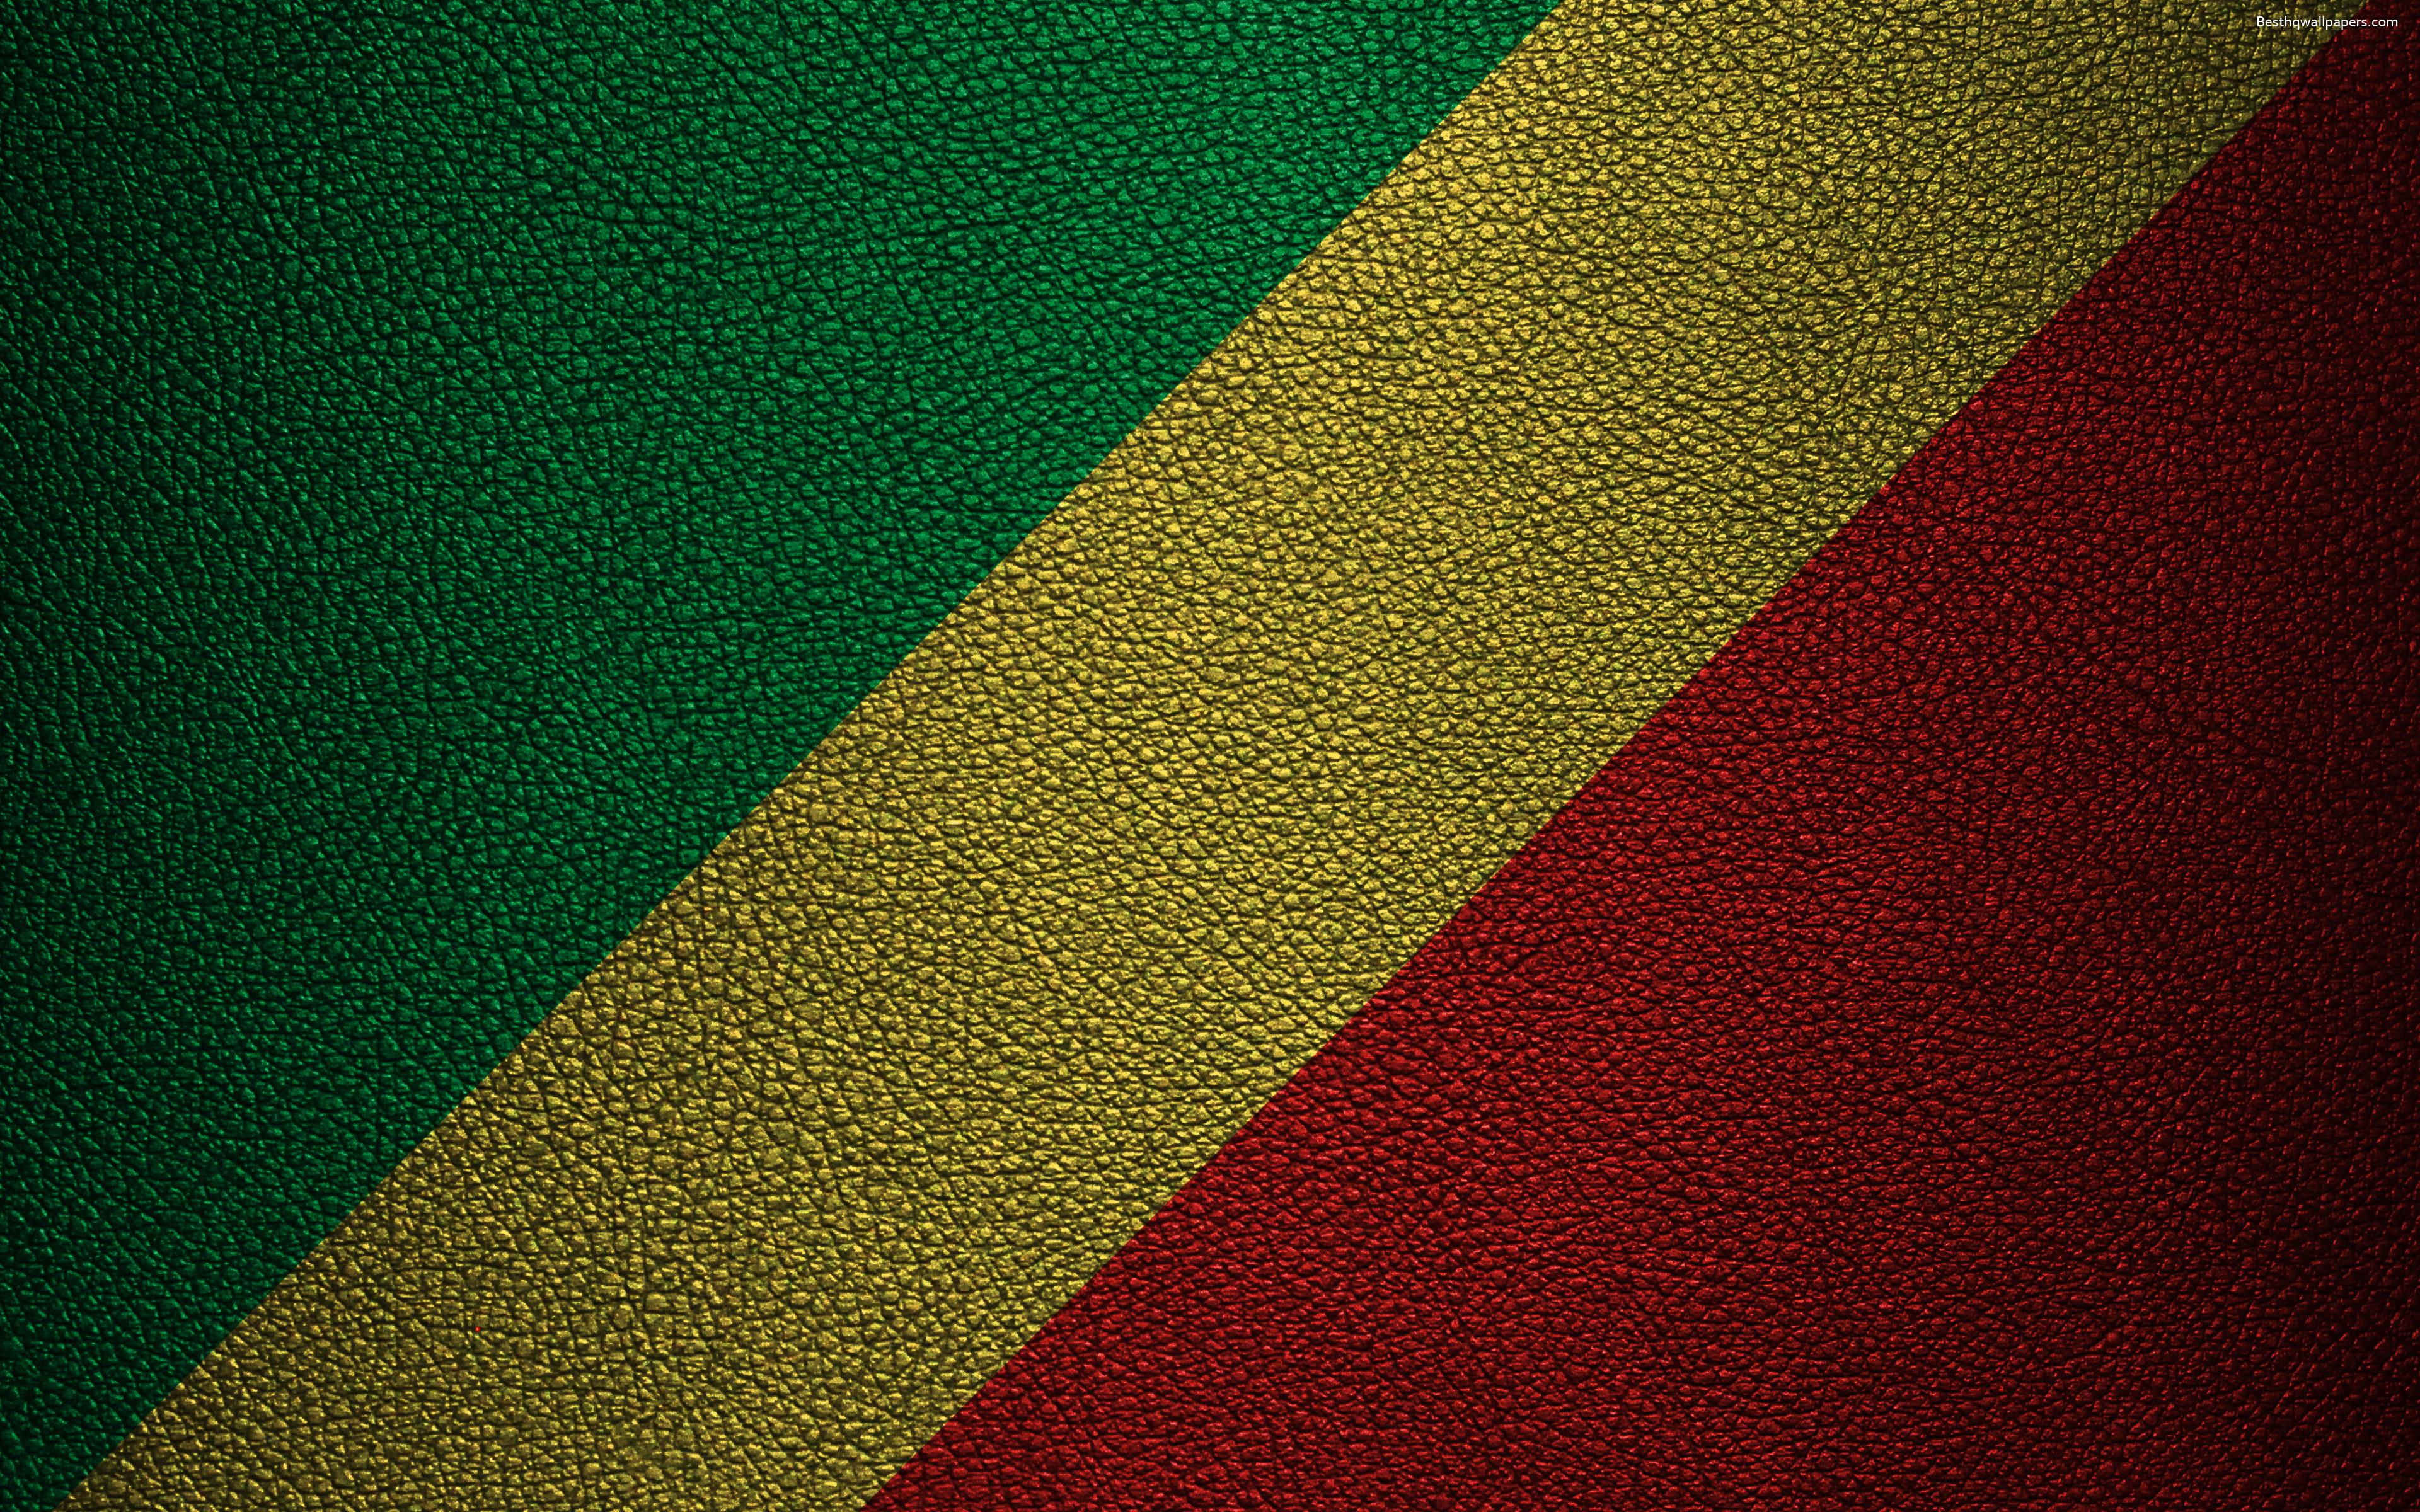 Download wallpaper Flag of the Republic of Congo, Africa, 4k